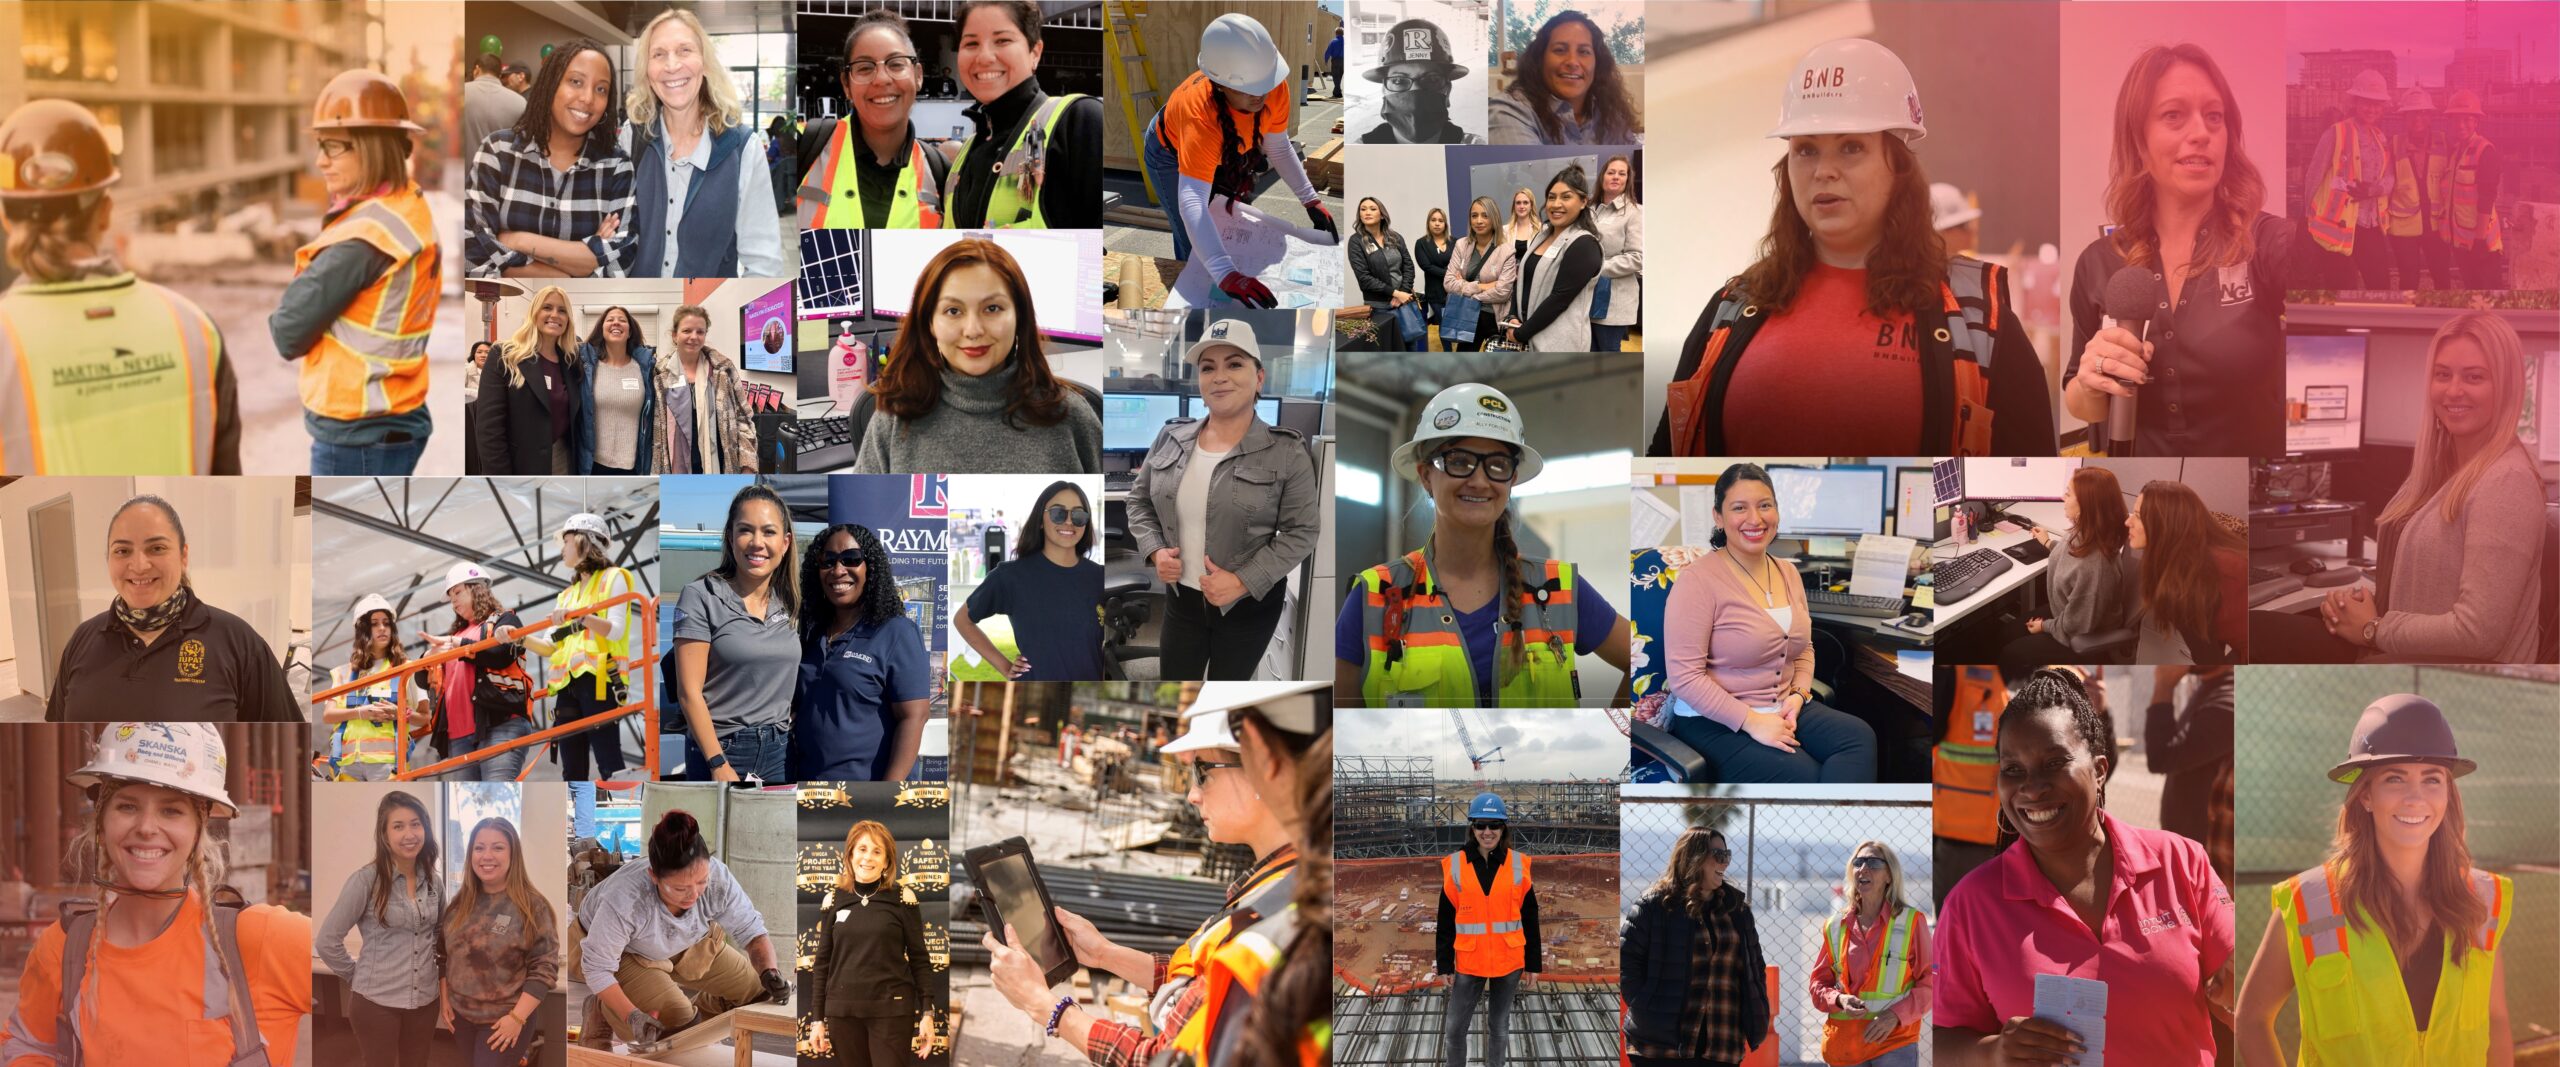 A collage of women in construction and other jobs.